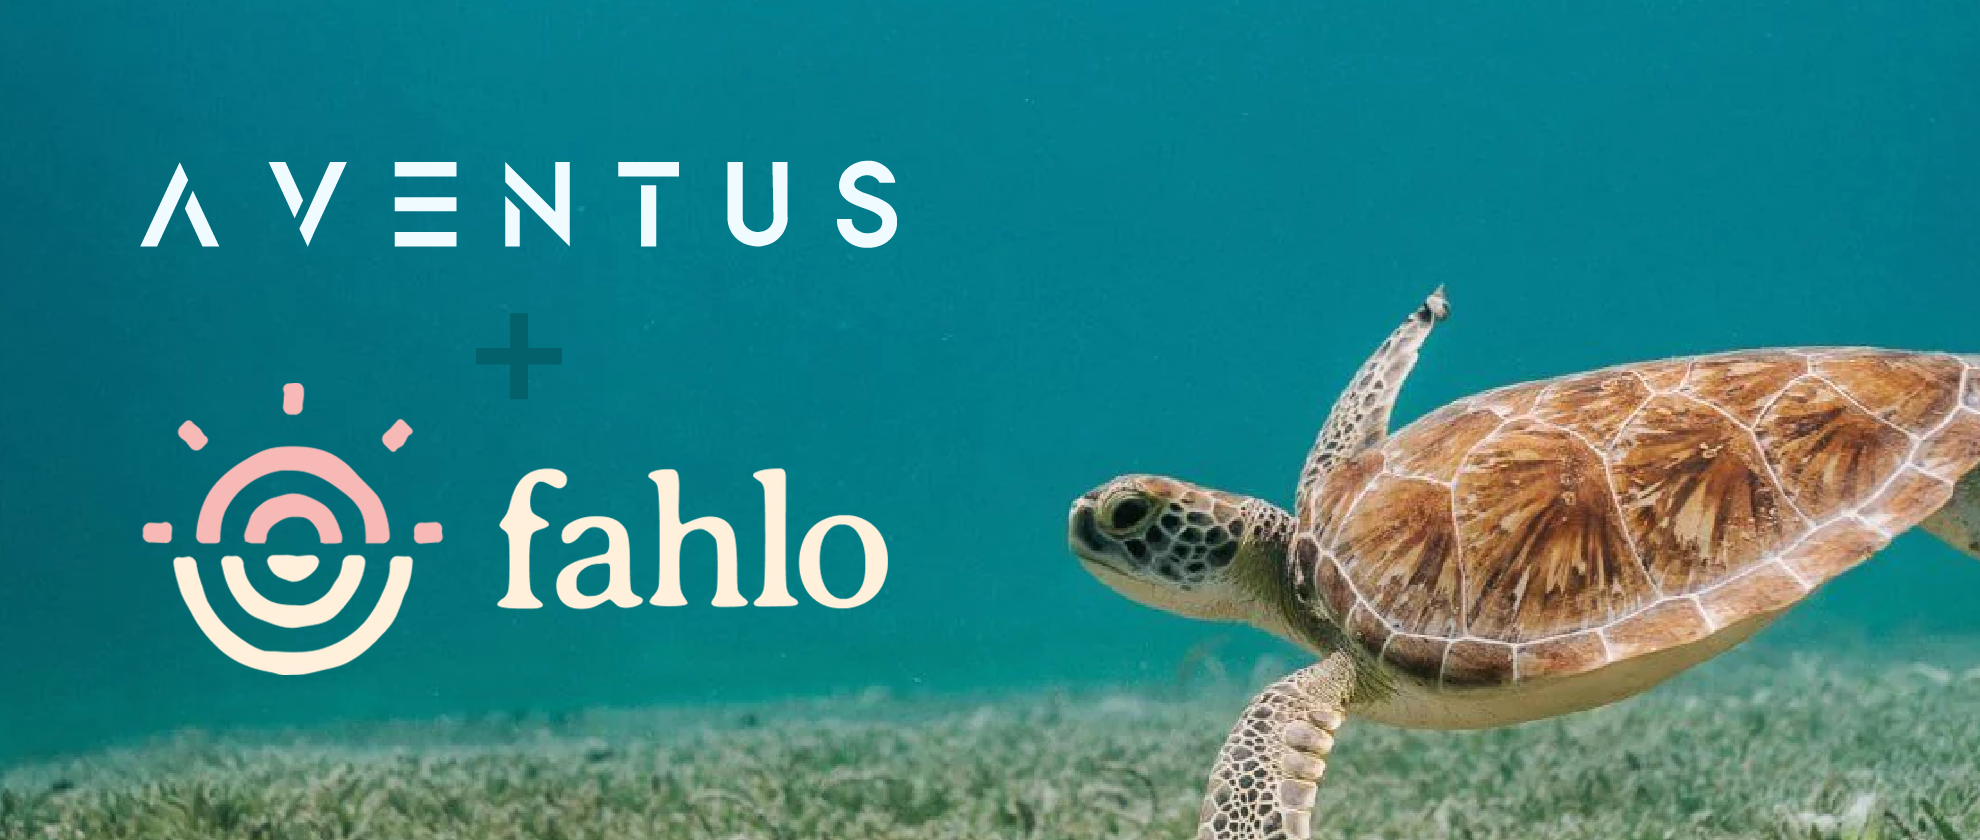 Underwater photo of a turtle swimming in a shallow region of the ocean. The logos of Aventus and Fahlo overlayed on top